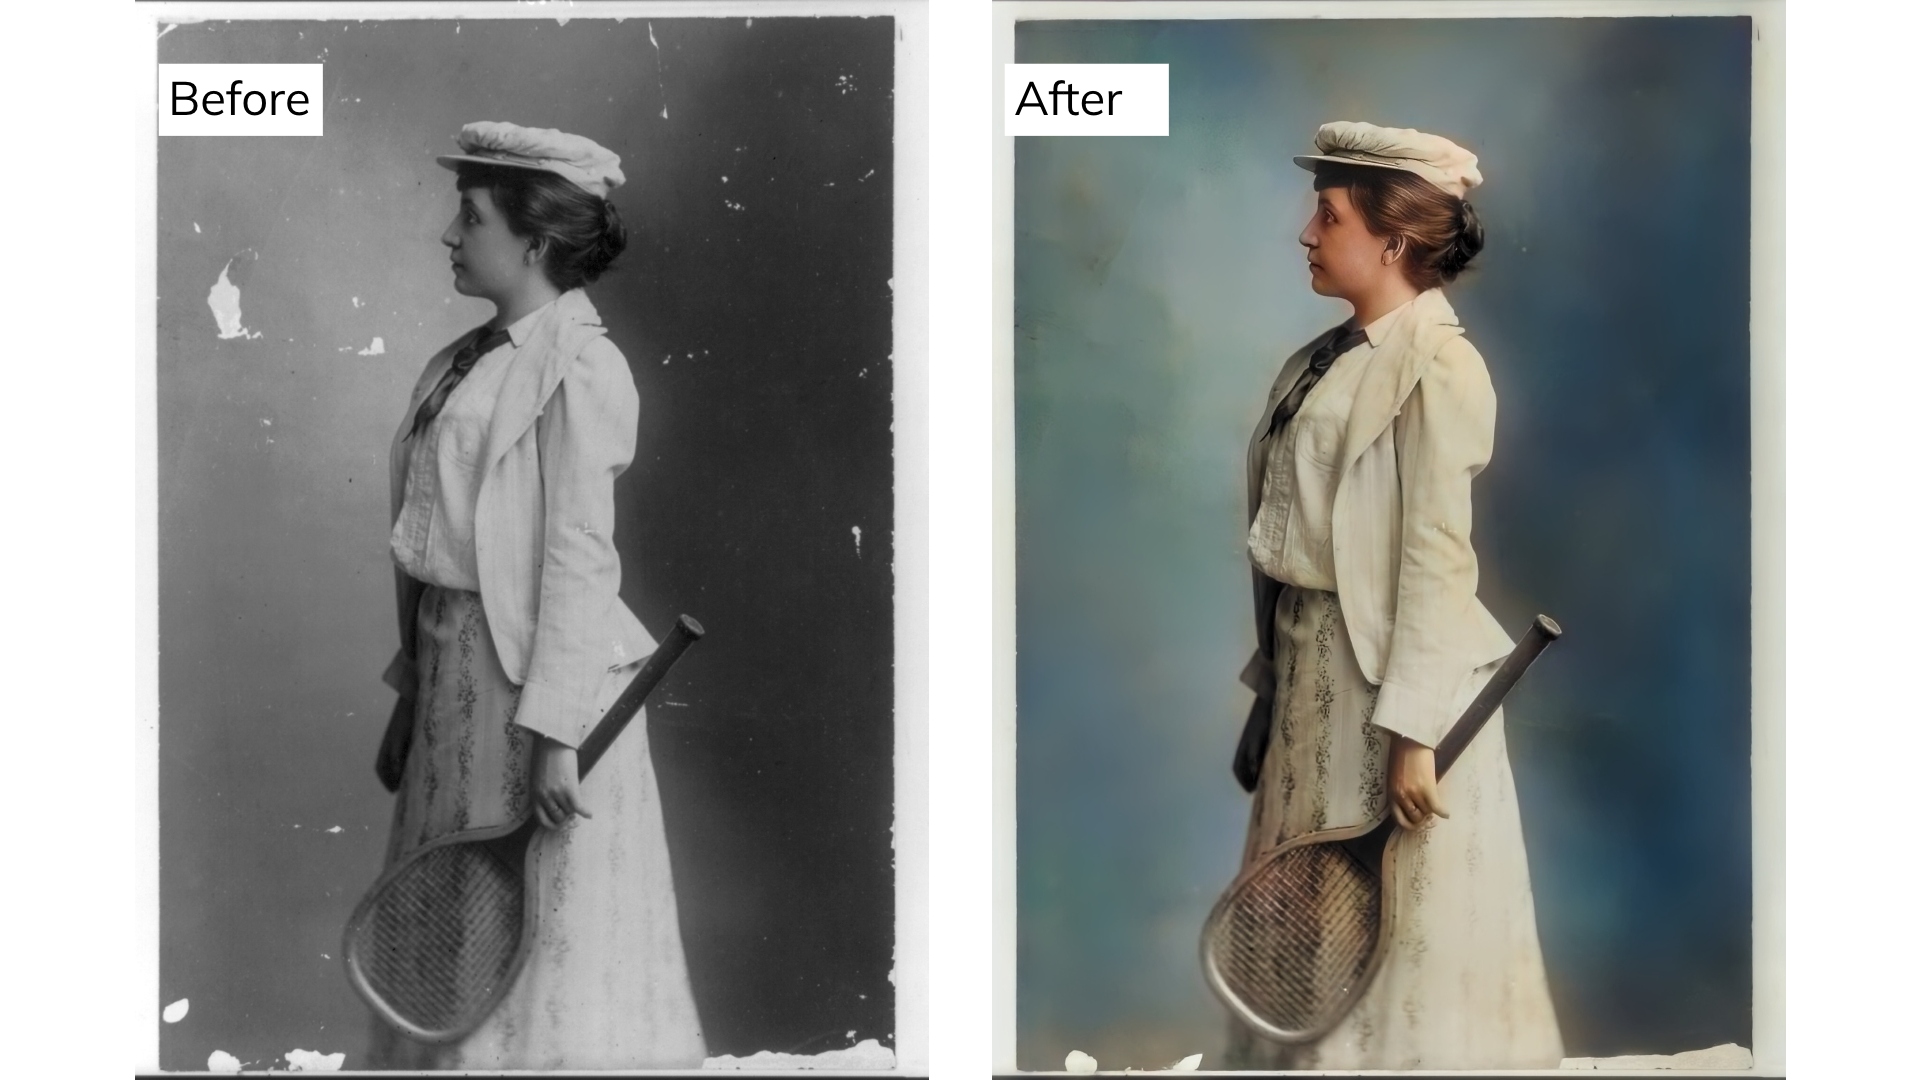 woman with tennis racket portrait Before & After restored.jpg